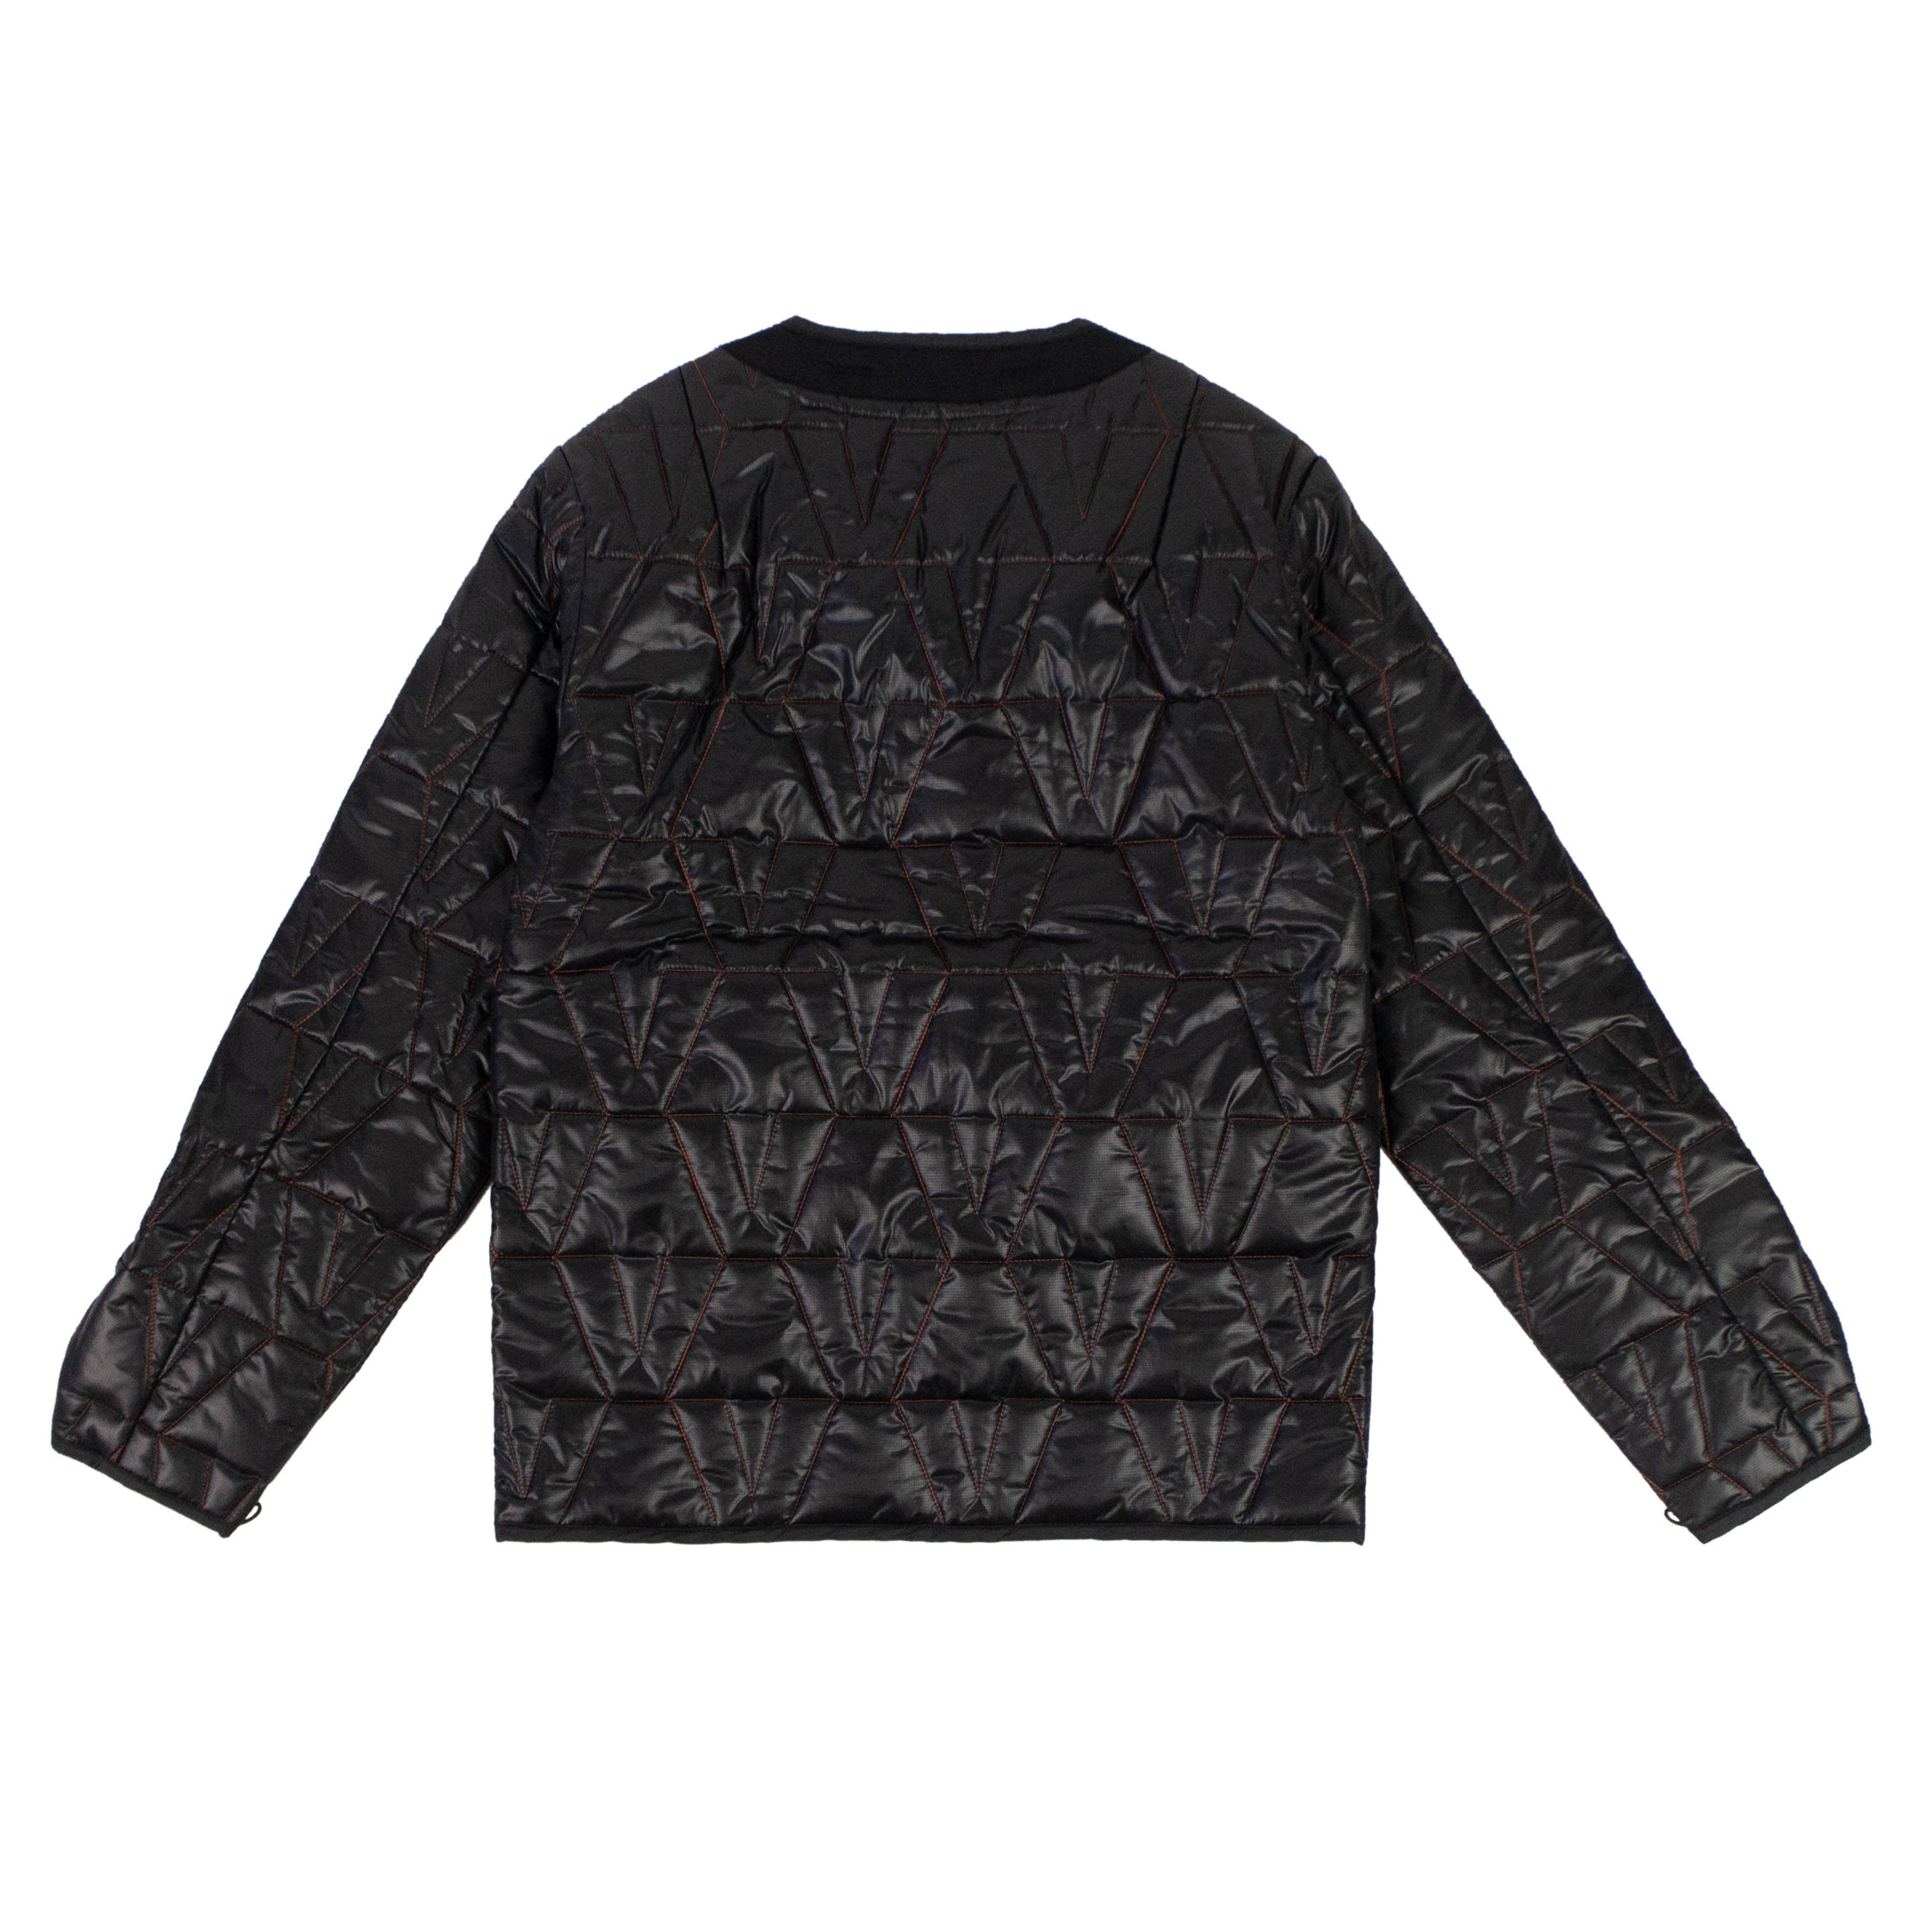 Alternate View 3 of Vlone Quilted Jacket - Black